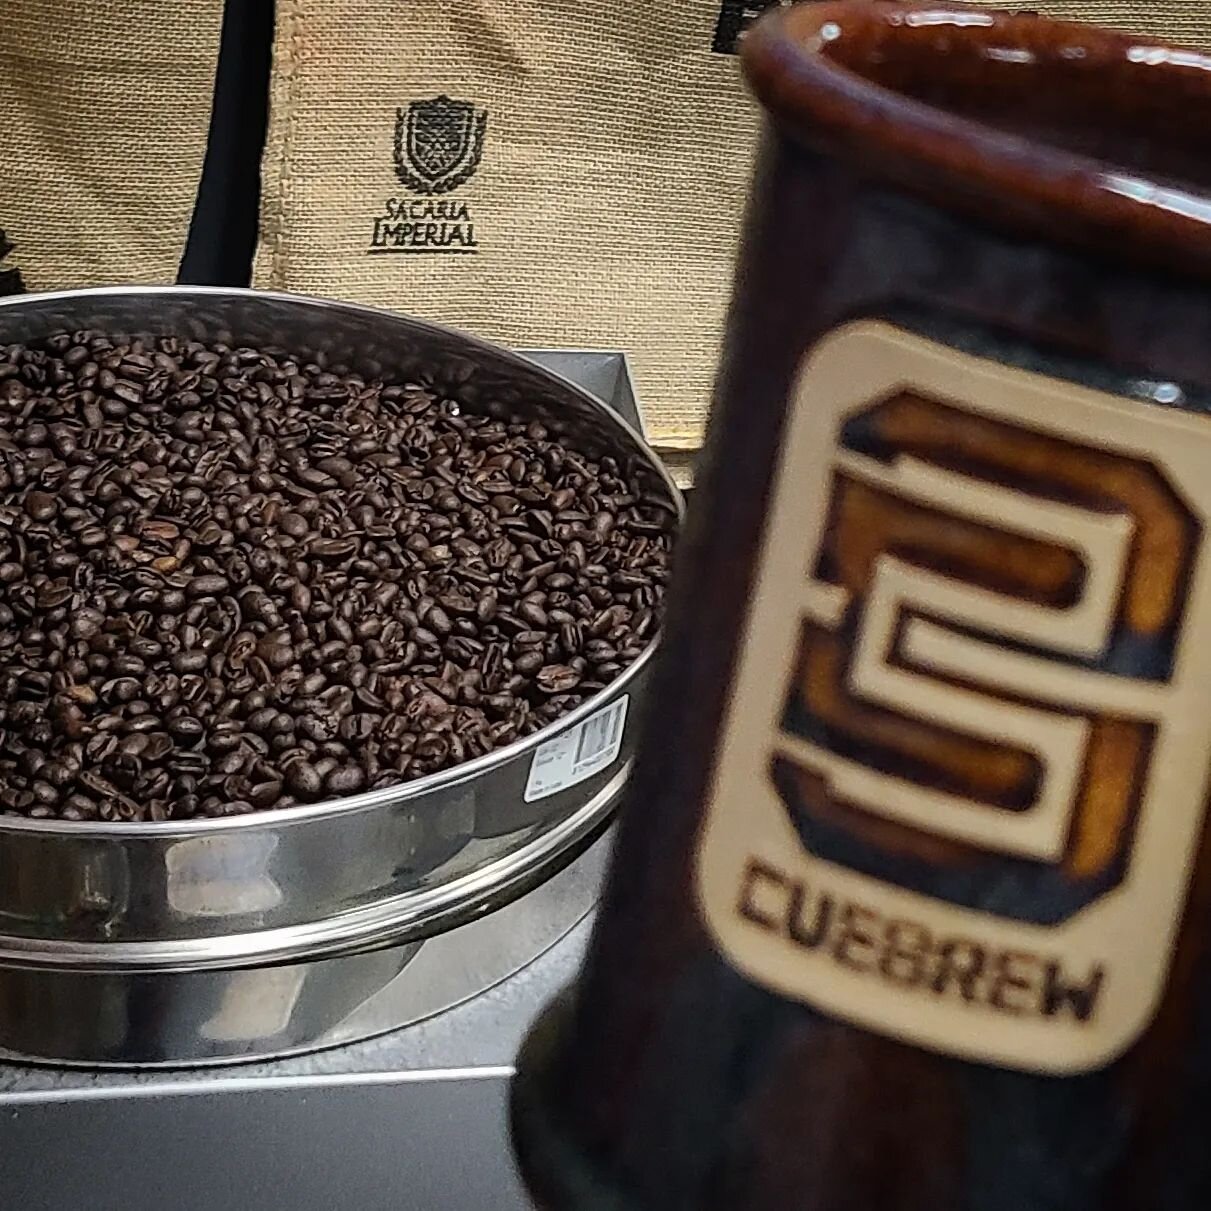 French Roast. Minors Roast. Love the smell of a dark roast in the roaster, coffee pot, and mug! Use code: COFFEETALK for 20% off your first order. Share with a friend! 

#coffee #cuebrew #coffeeroaster #coffeetime #smallbatchcoffee #shopsmall #smallb